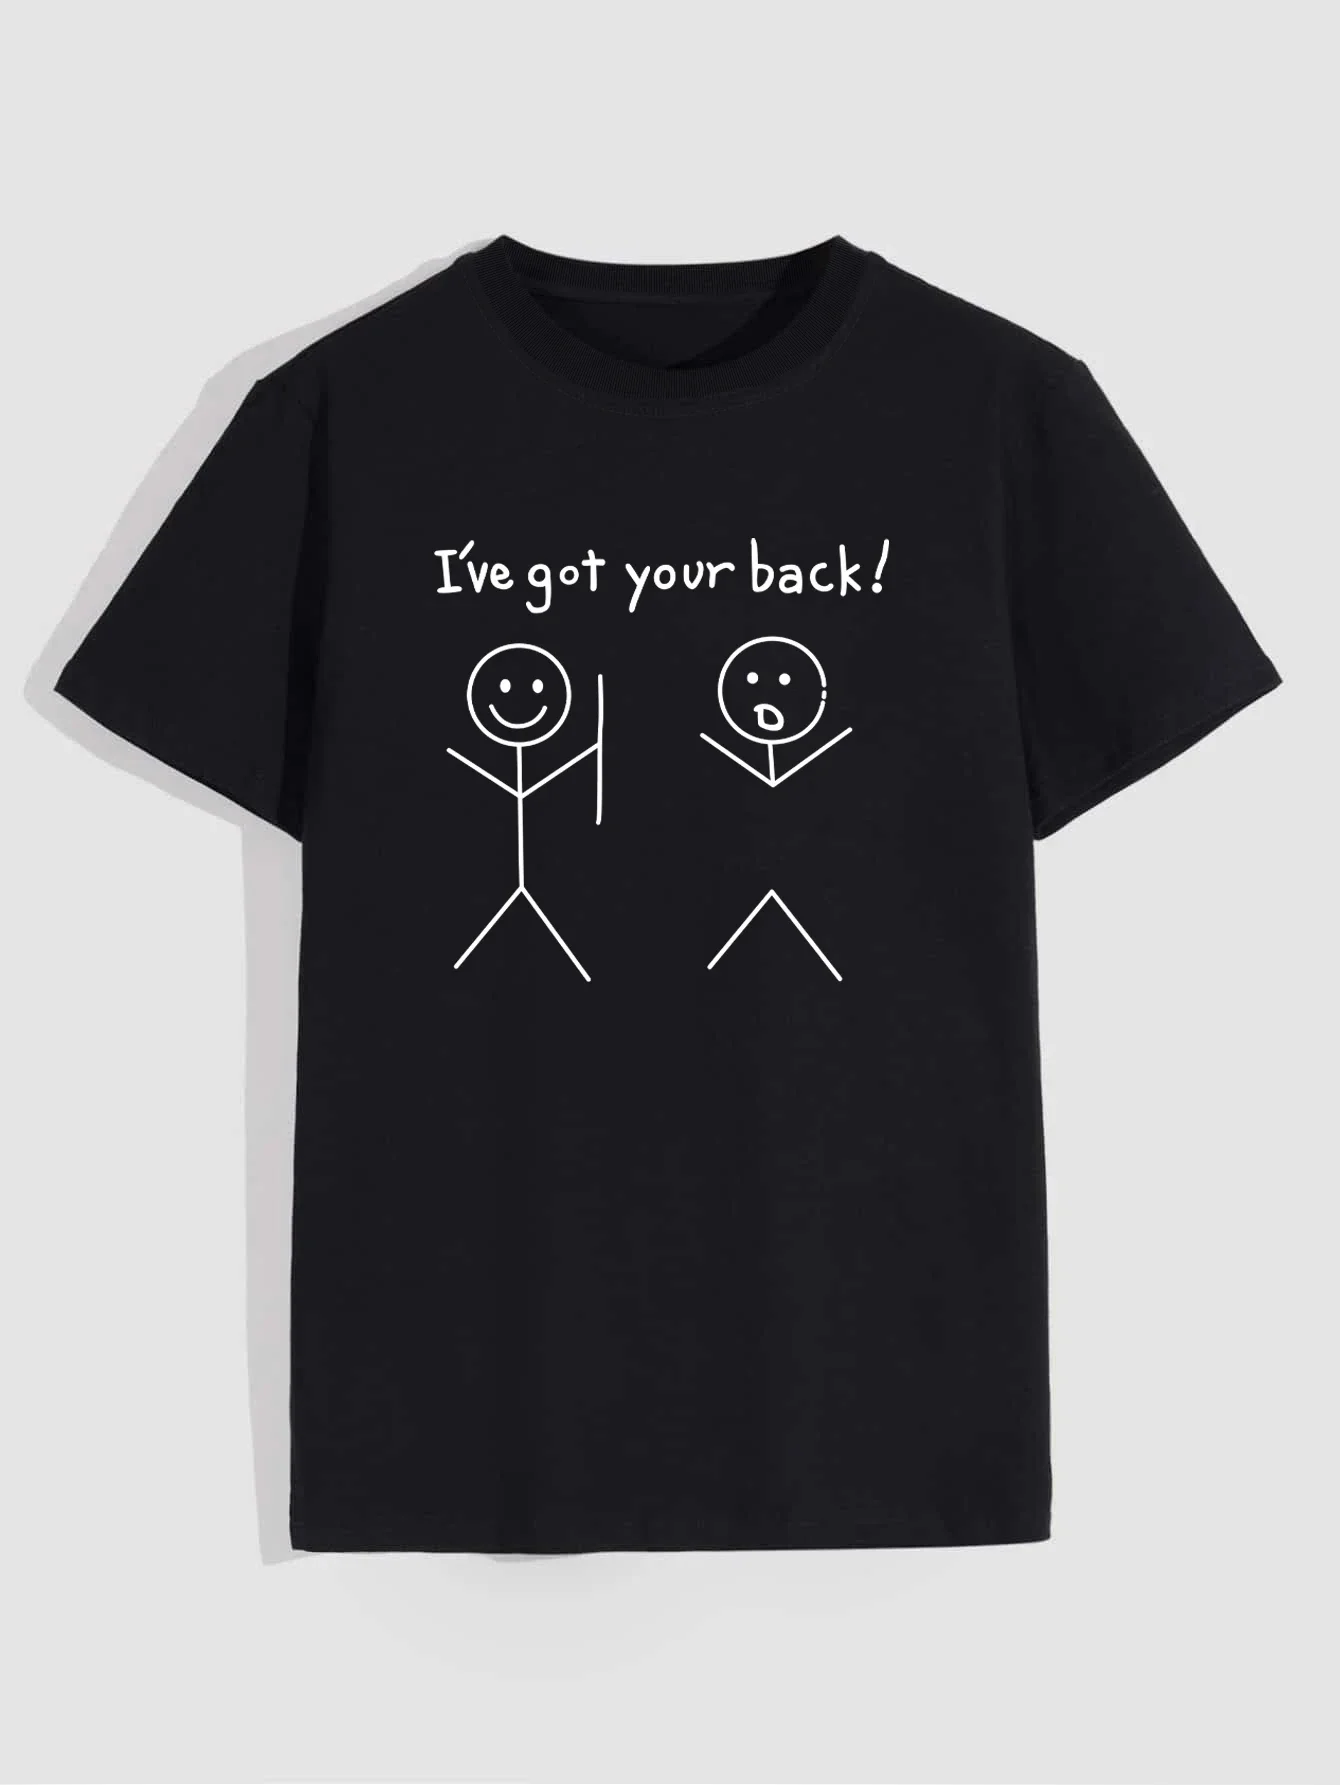 

Crew Neck Top, Casual Clothing, Summer Best Sellers Men's "I've Got Your Back" Short Sleeve T-shirt graphic t shirts